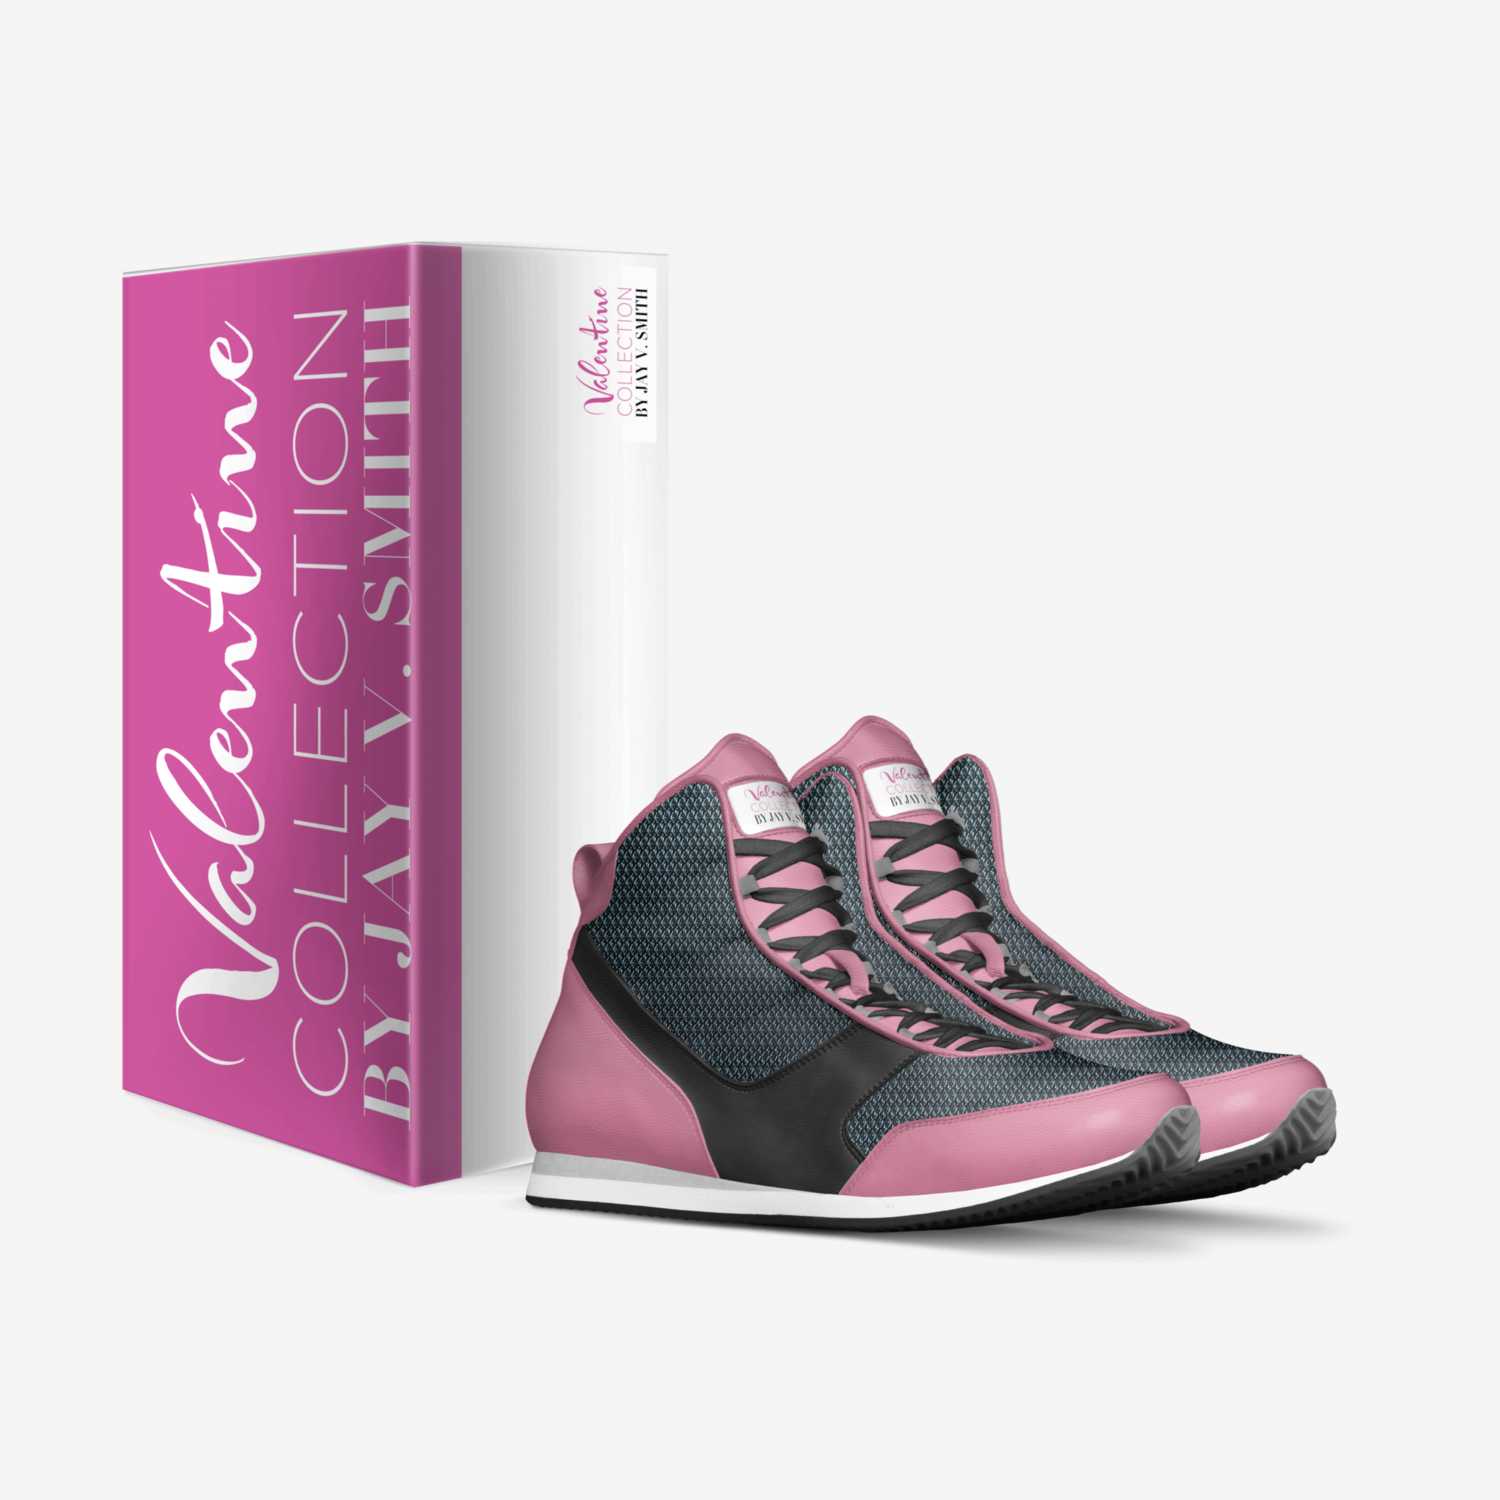 VALENTINE custom made in Italy shoes by Jay V Smith | Box view